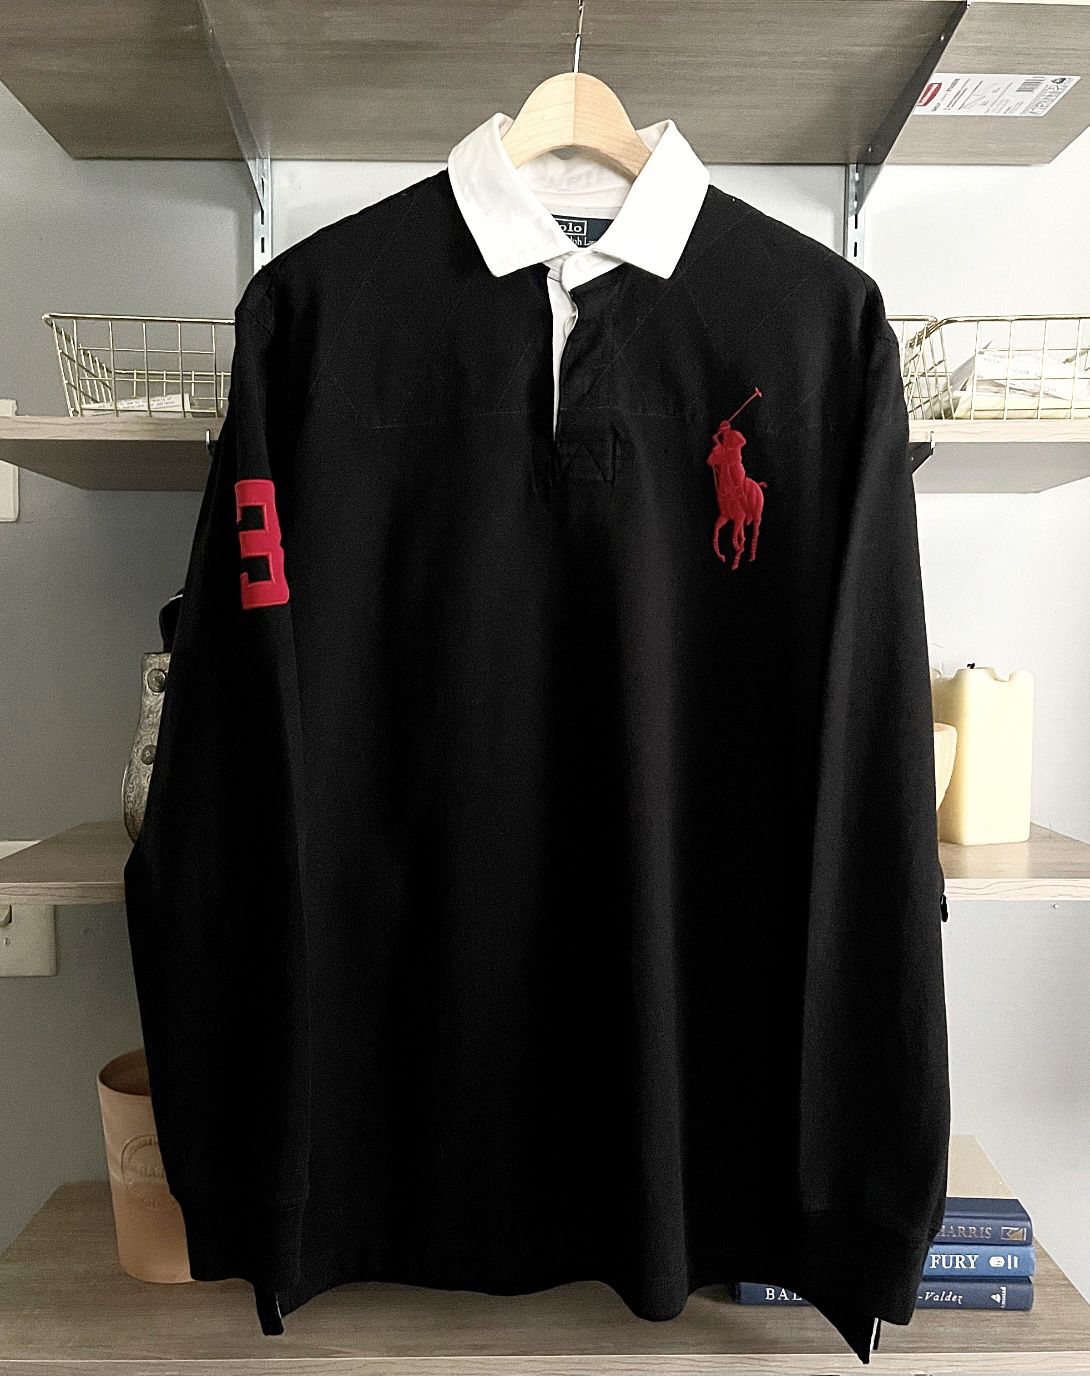 Mens Polo Ralph Lauren Rugby Shirt size L retail $198 Regular fit. Lightweight classic rugby soft cotton fleece and updated woven collar. Color black,